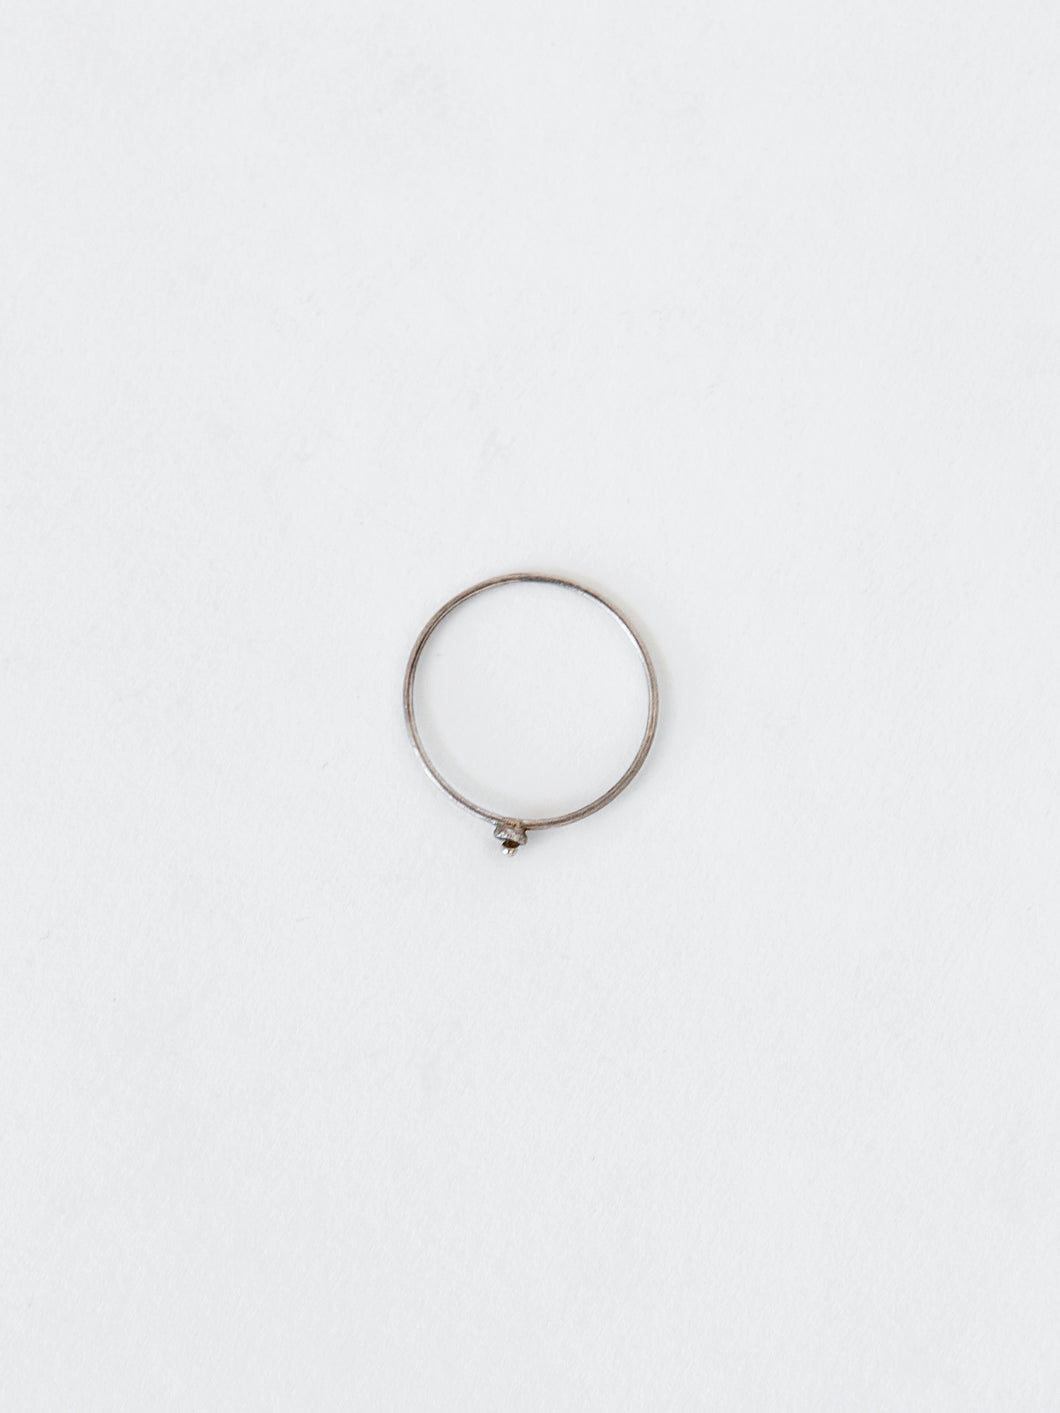 Sterling Silver Polline Ring